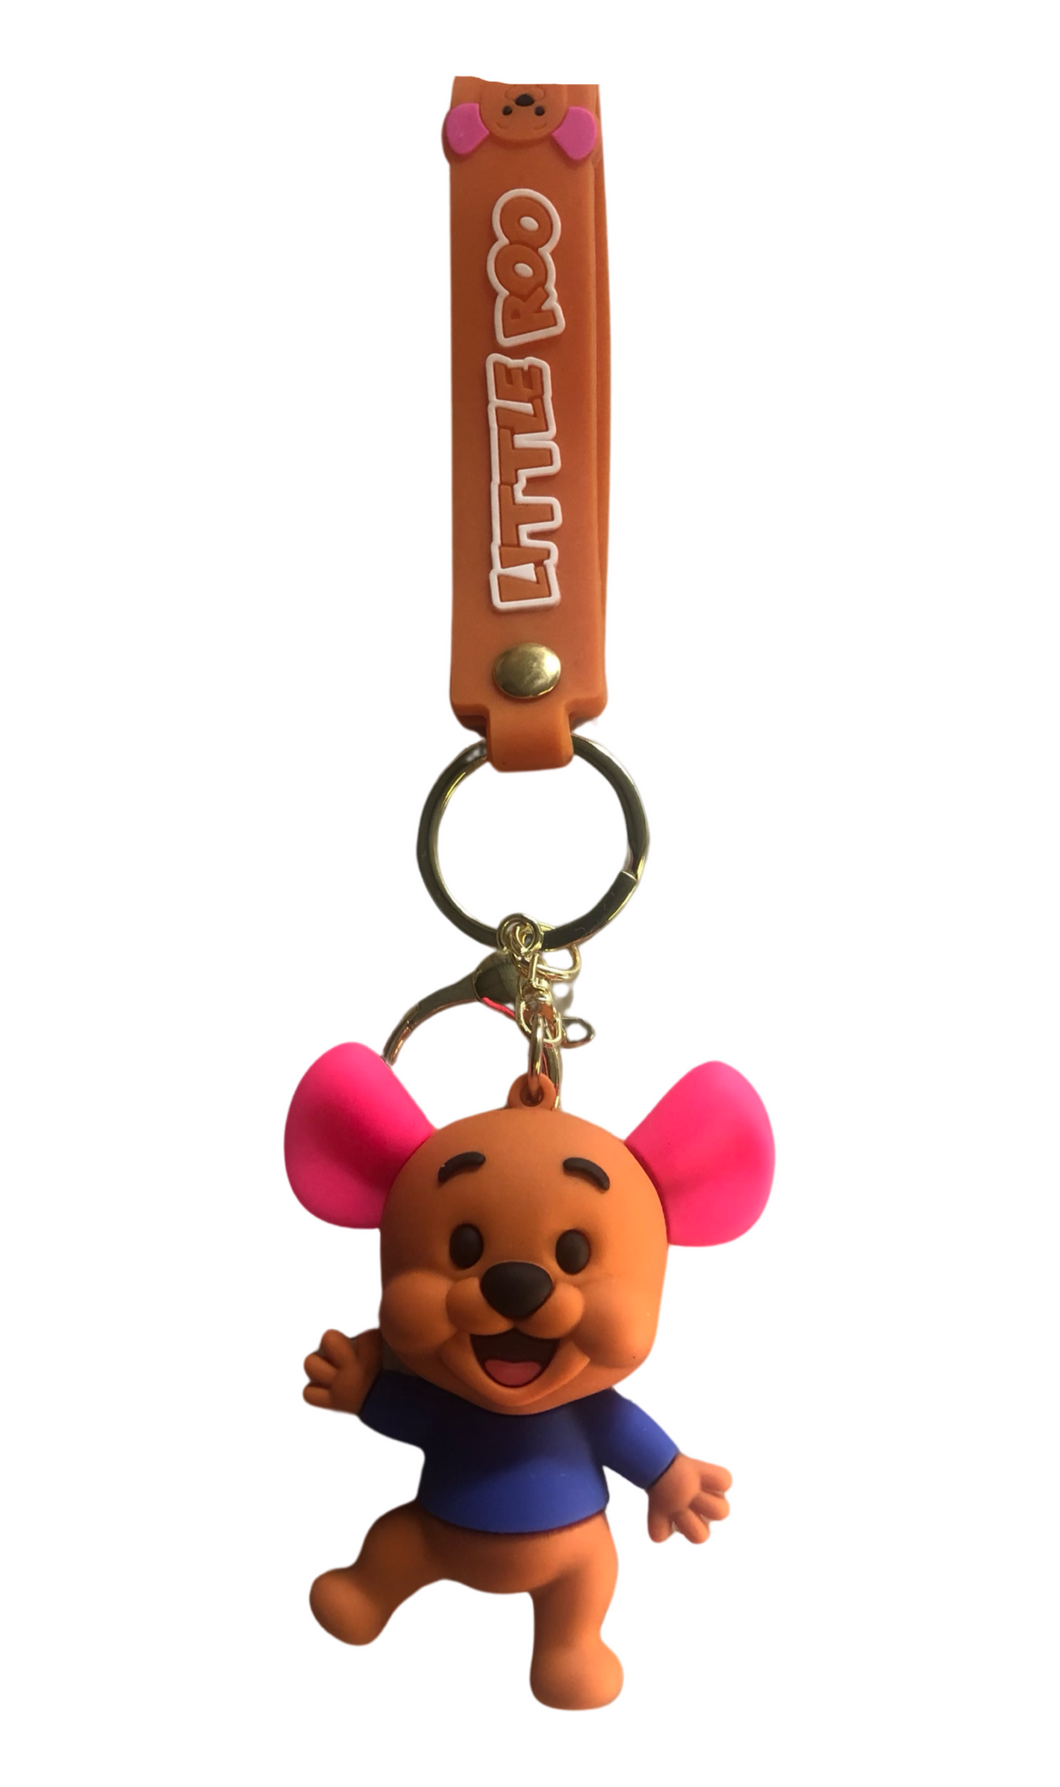 Little Roo - Winnie the Pooh character Keyring